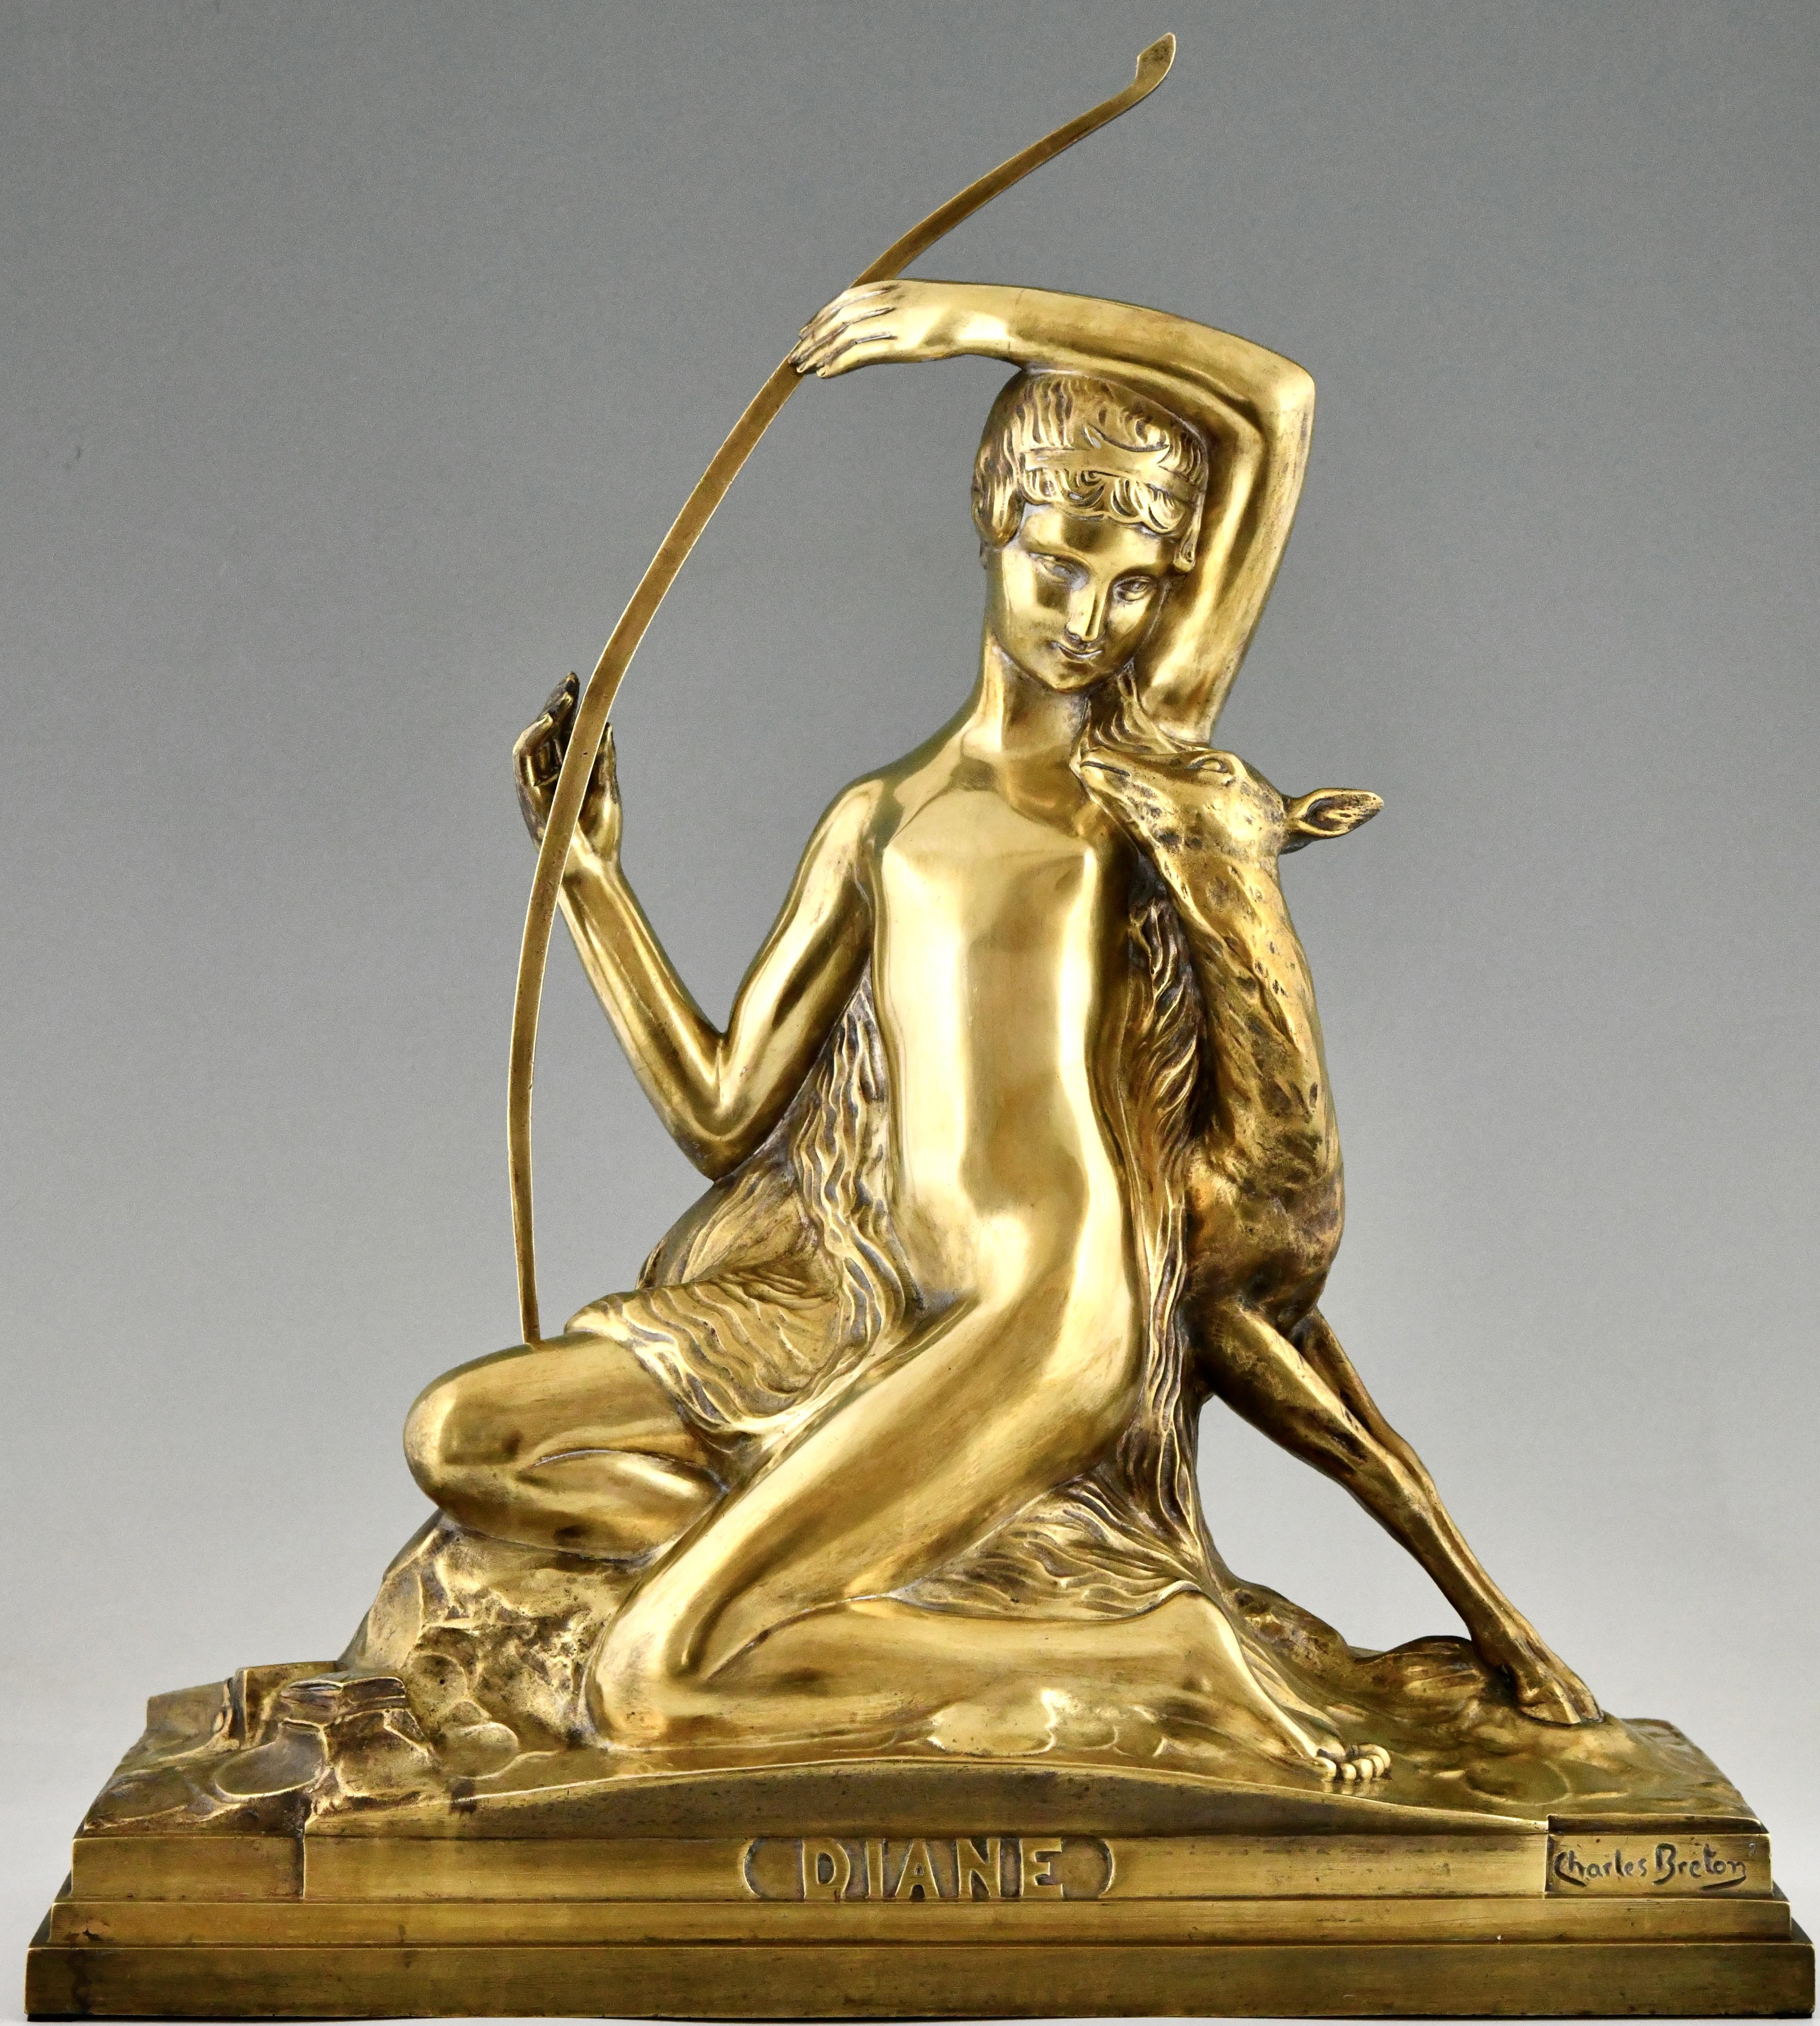 Art Deco bronze sculpture Diana the huntress with bow and fawn by Charles Eugène Breton on a rectangular bronze base. 
With artist signature and title. 
France 1930. 
Art Deco bronze sculpture Diana the huntress with bow and fawn by Charles Eugène